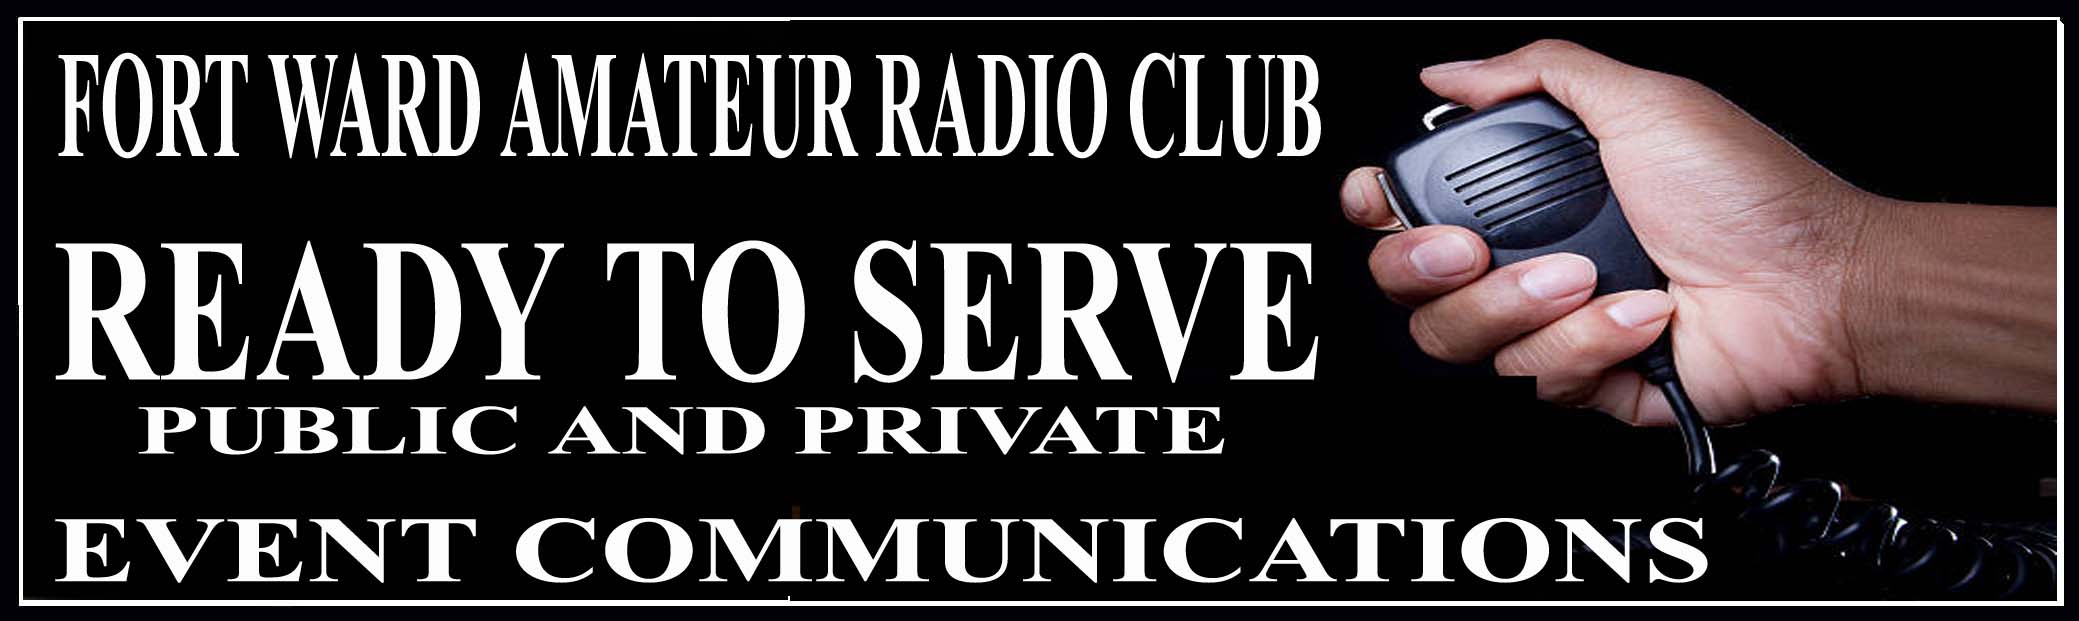 Amateur Radio Forms picture pic